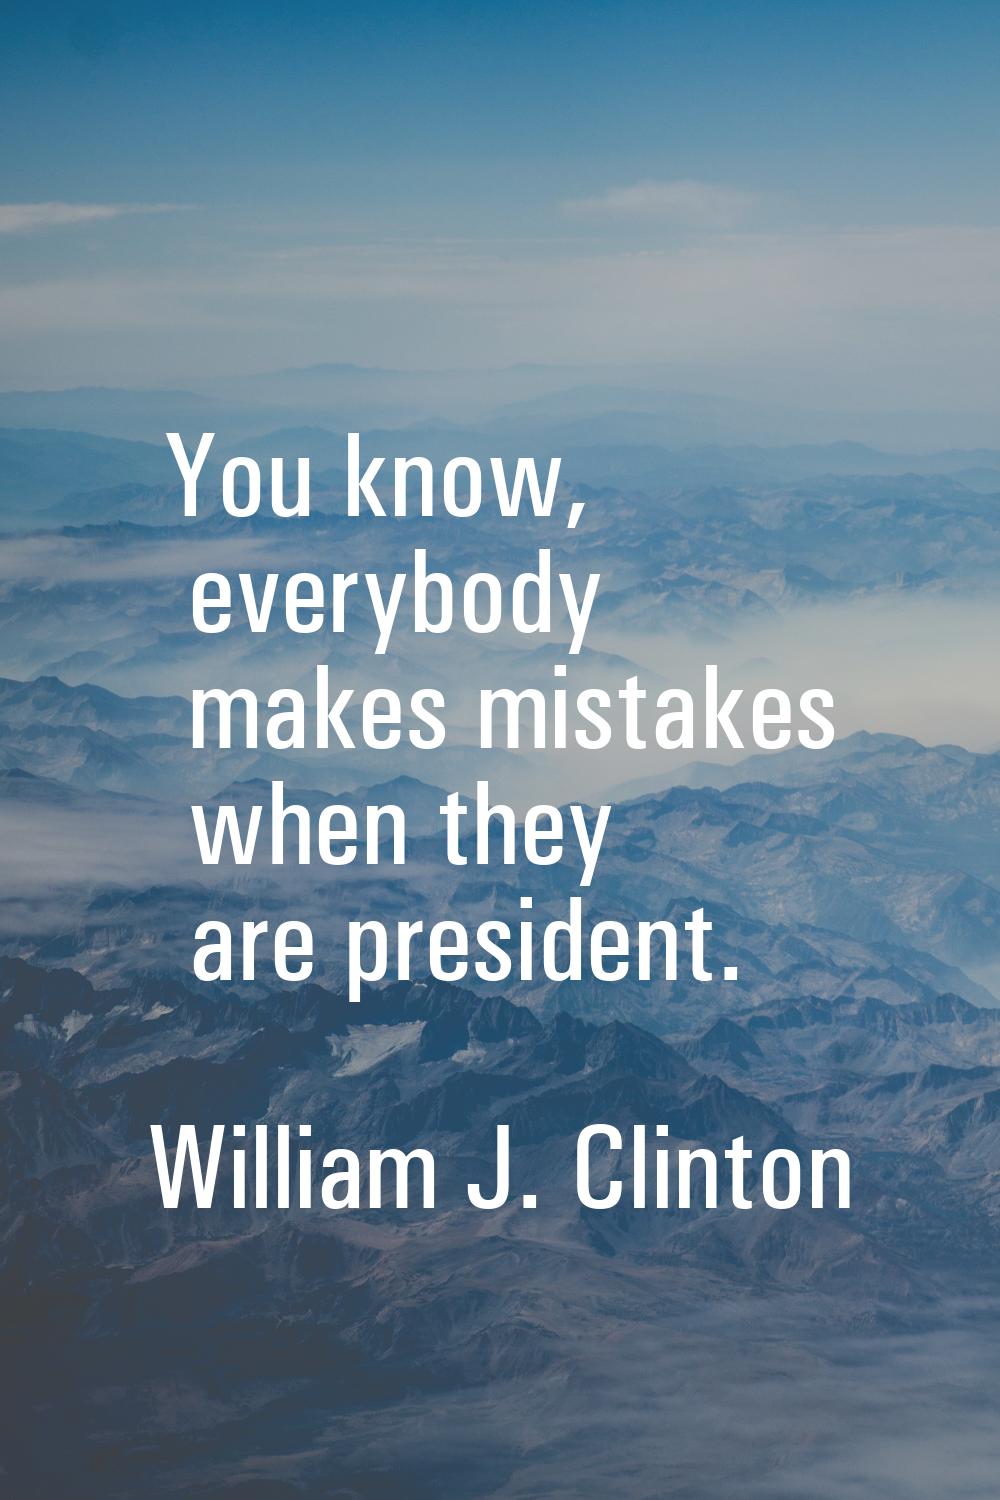 You know, everybody makes mistakes when they are president.